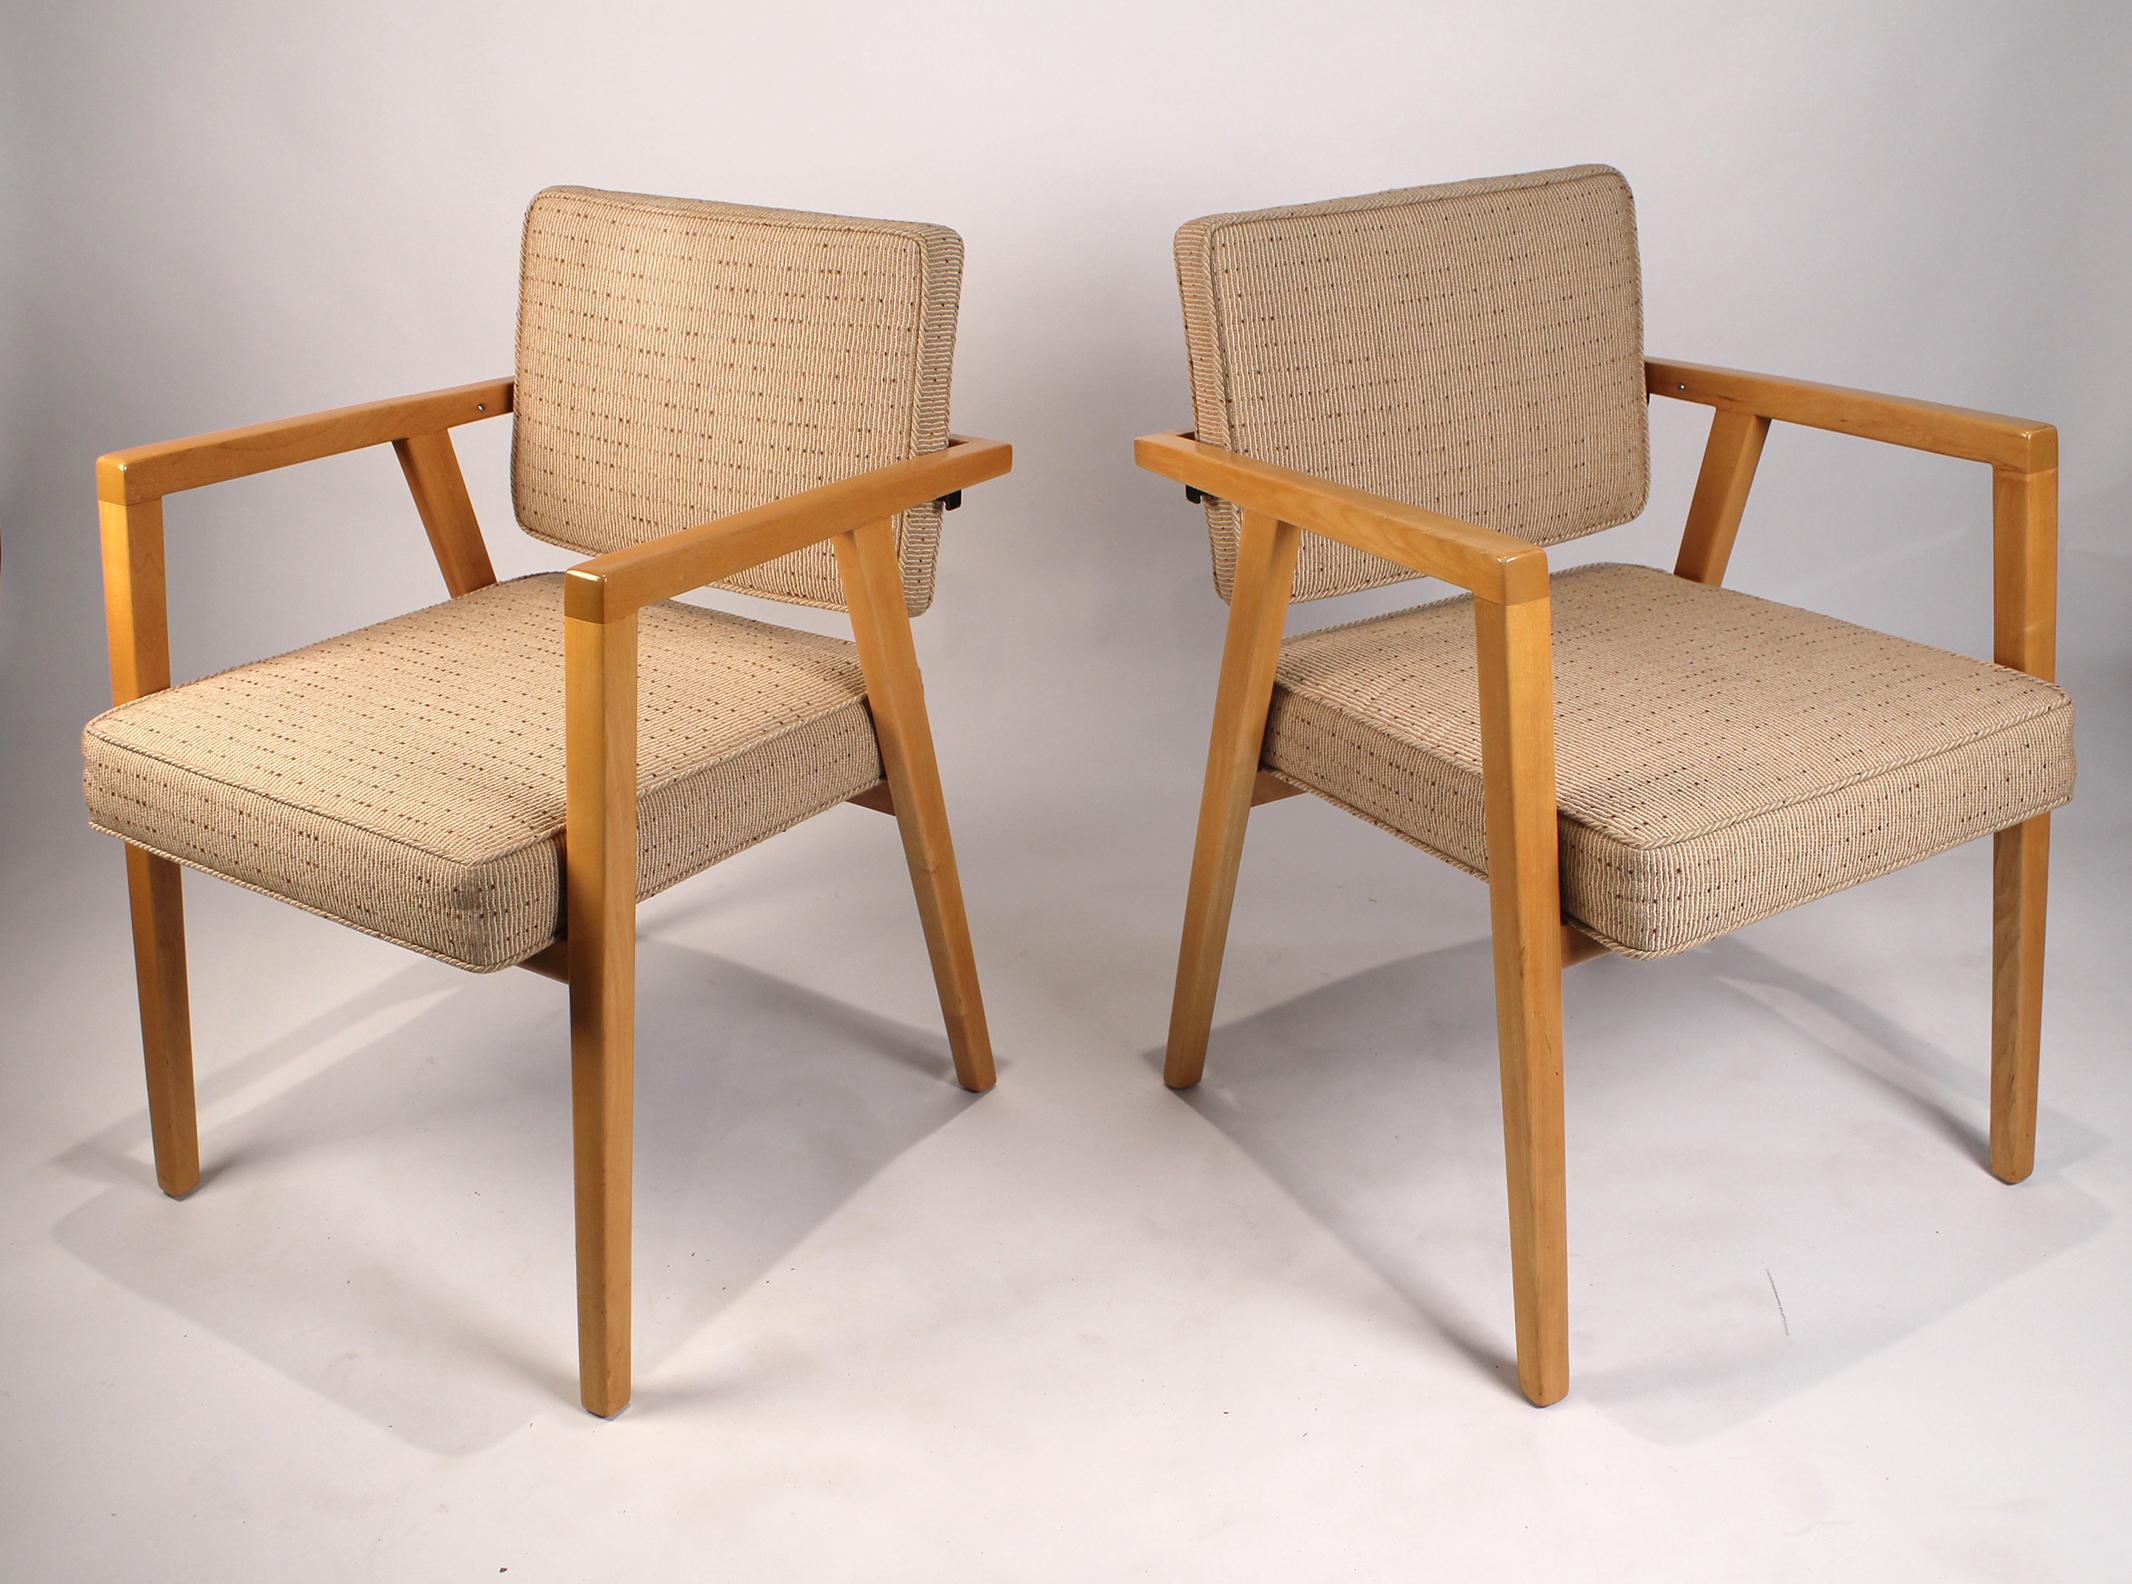 American Set of Ten Fully Restored Vintage Franco Albini Dining Chairs produced by Knoll